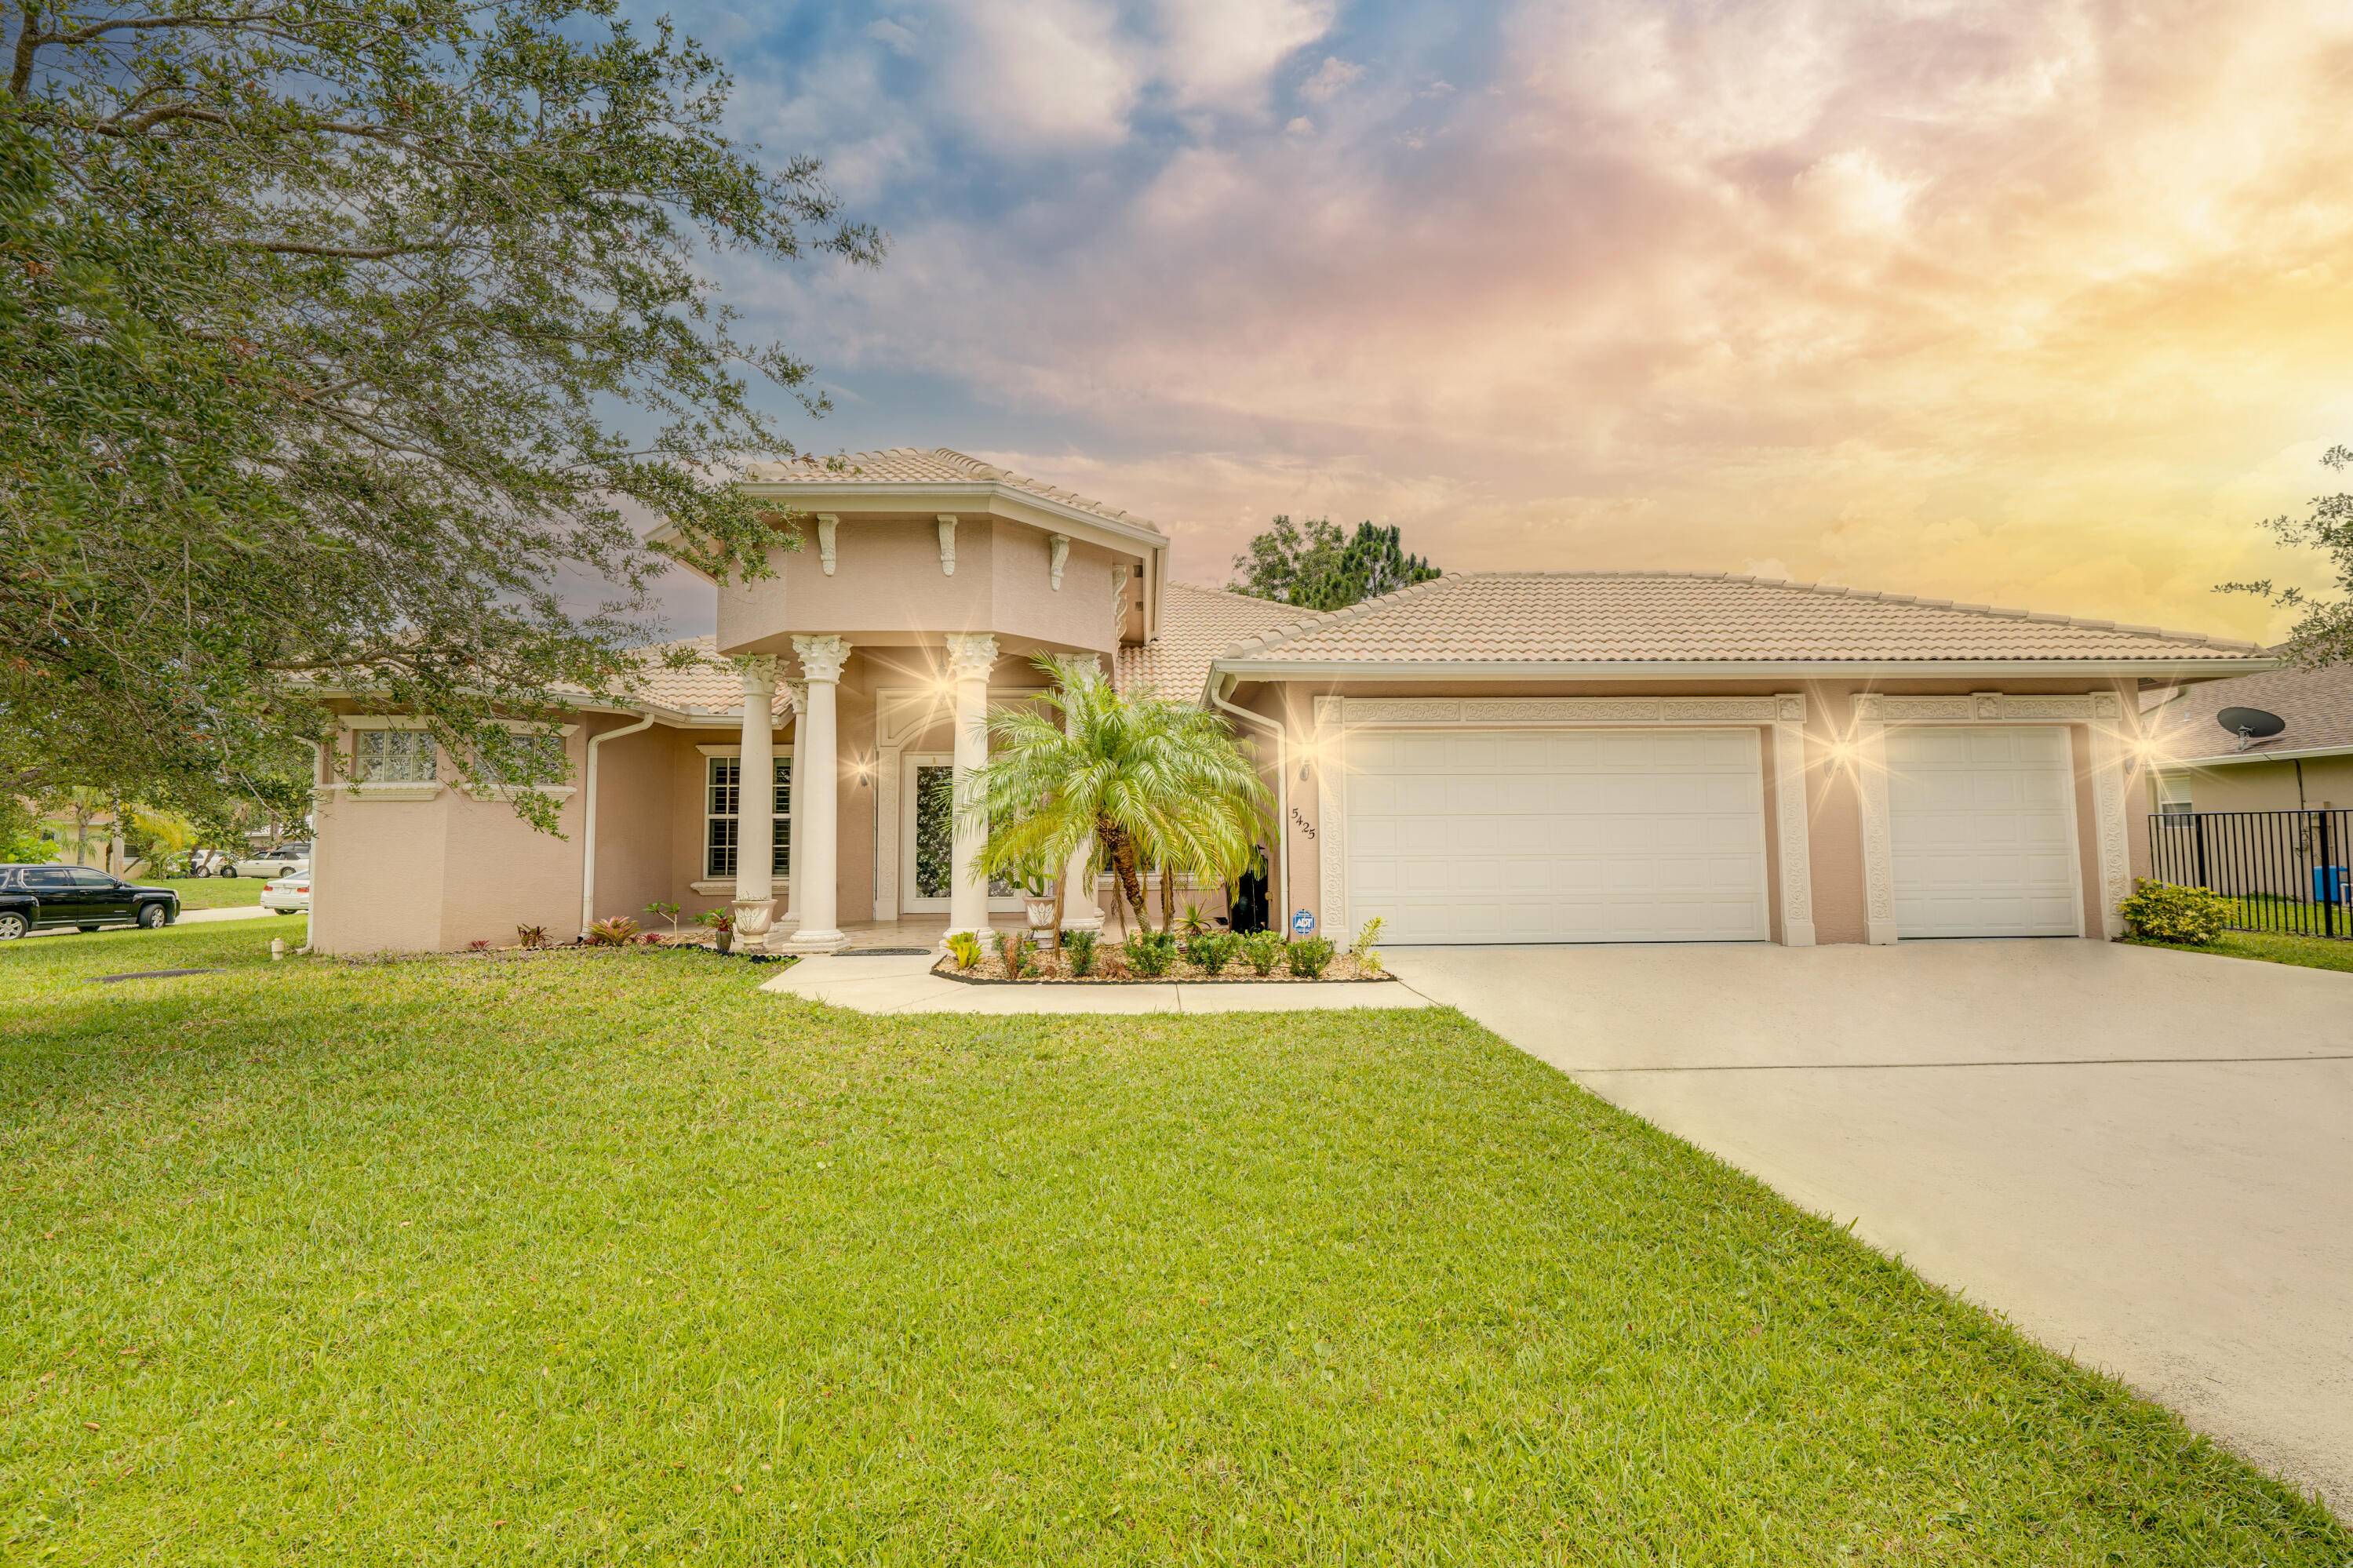 This beautiful custom built Vanderhoff Tuscany ll model home featuring 4 bedrooms, 3 bathrooms, 3 car garage, NO HOA, Mediterranean style roof with a pool on an oversized corner lot.